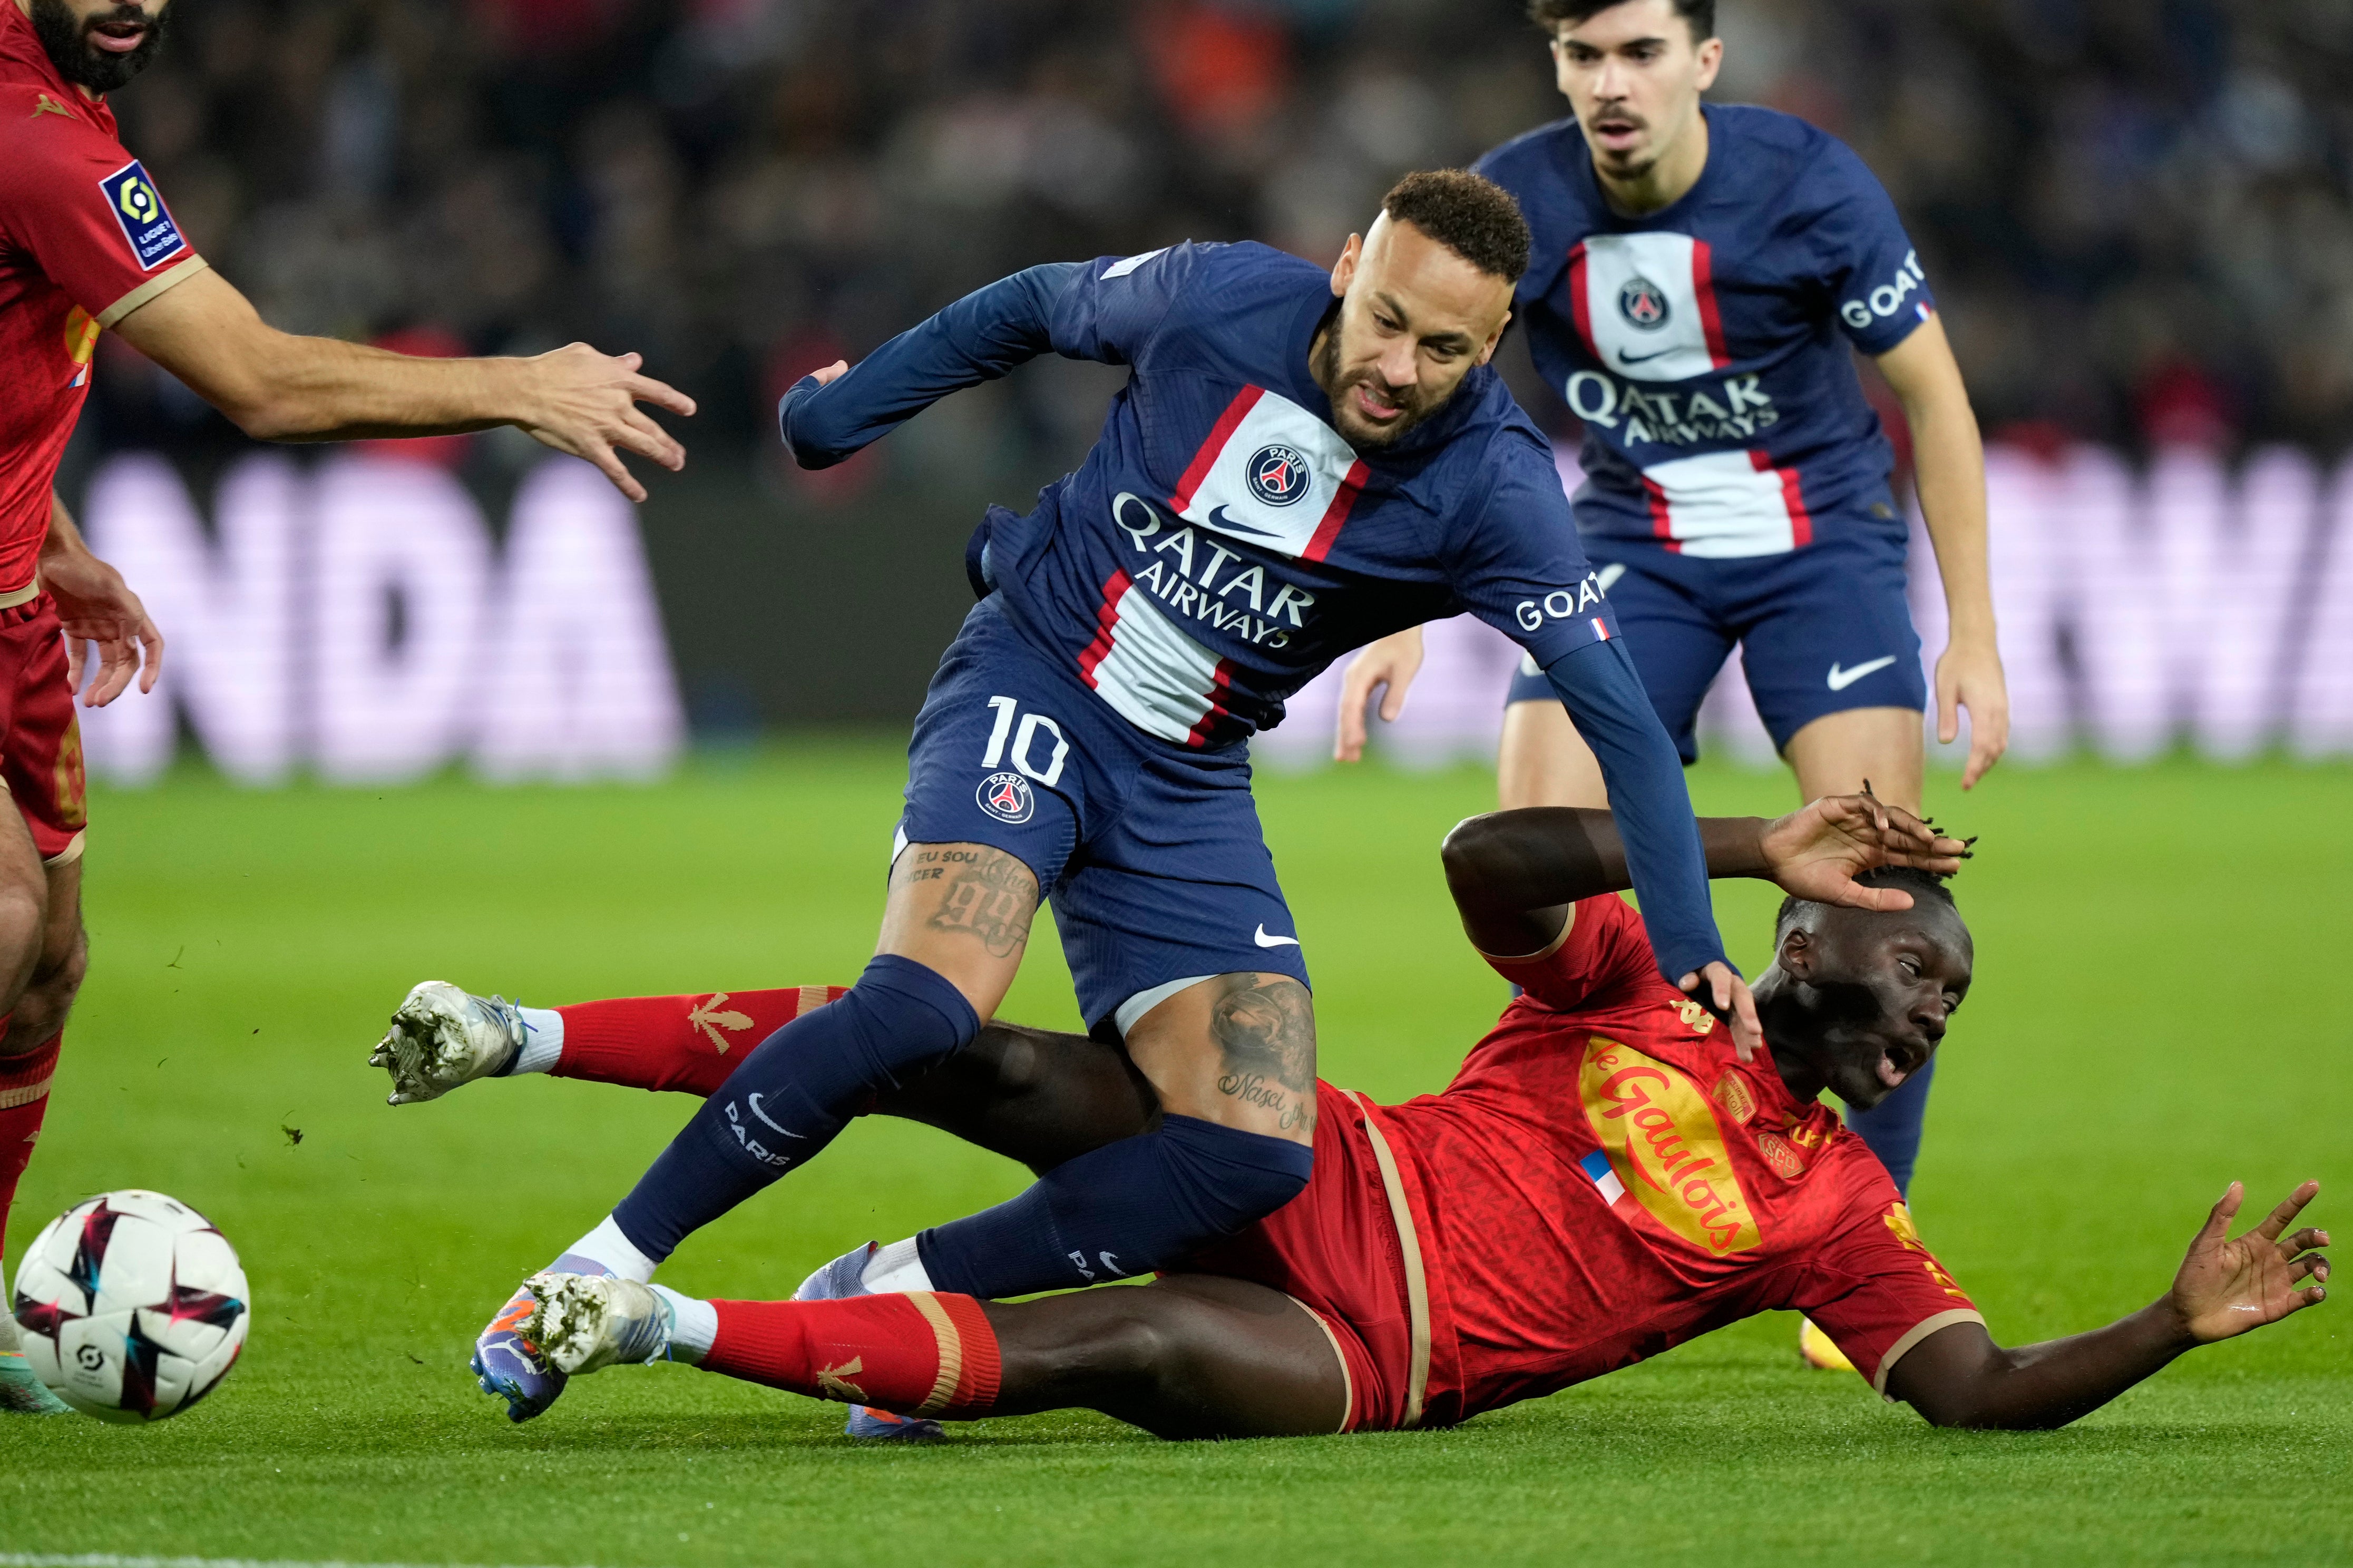 PSG vs Angers SCO LIVE Ligue 1 result, final score and reaction The